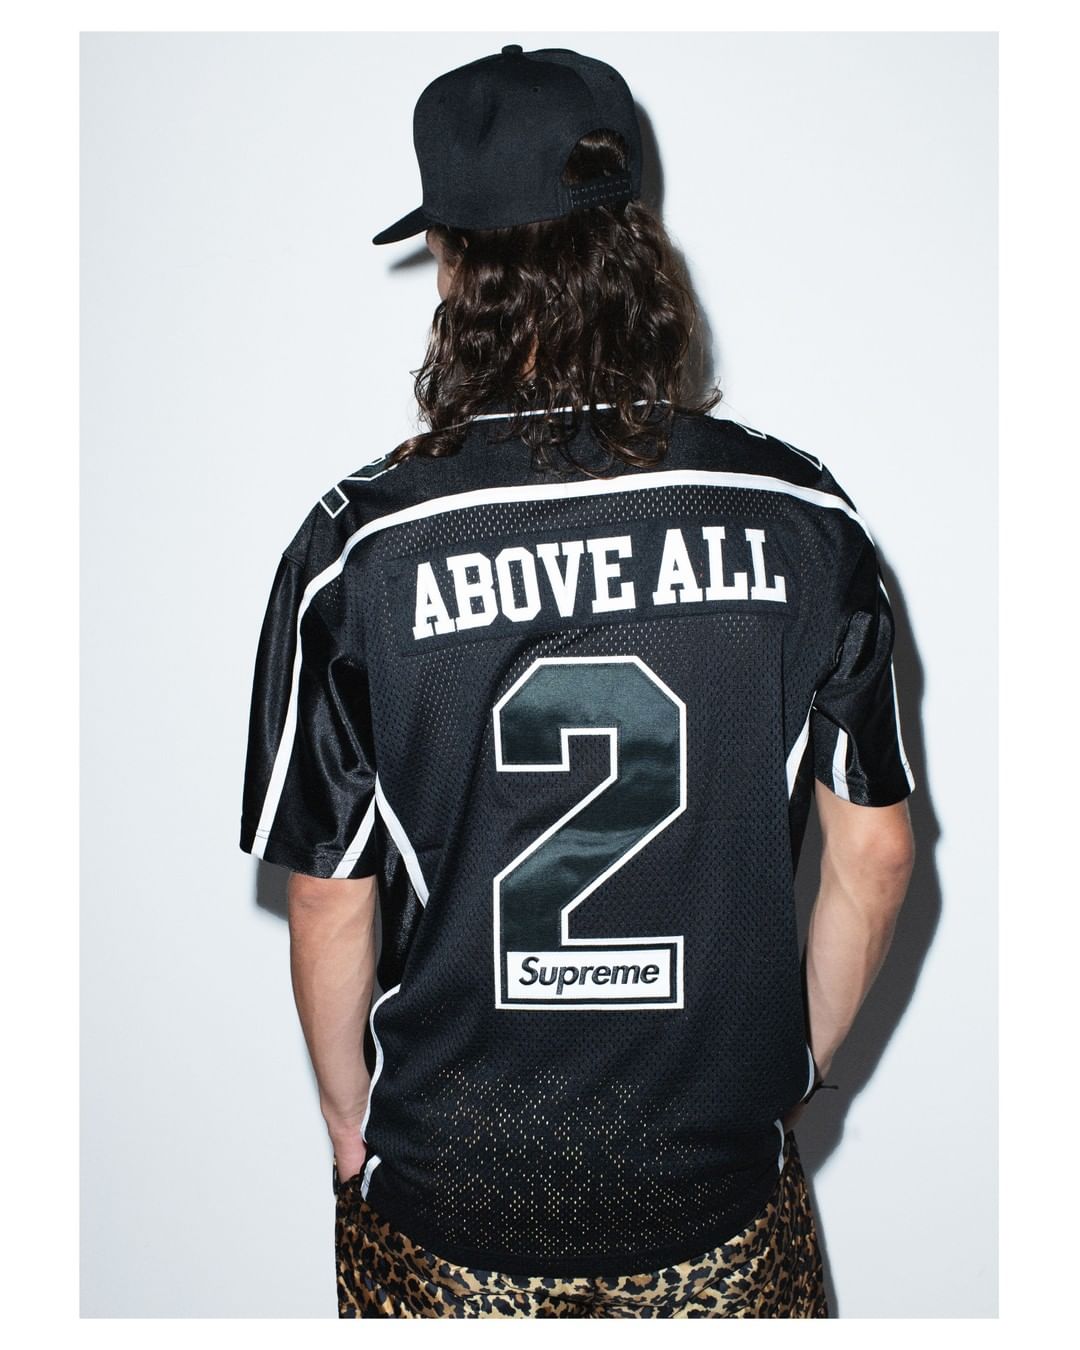 Supreme offer Closer look at AW21′ Collection in THEM Magazine